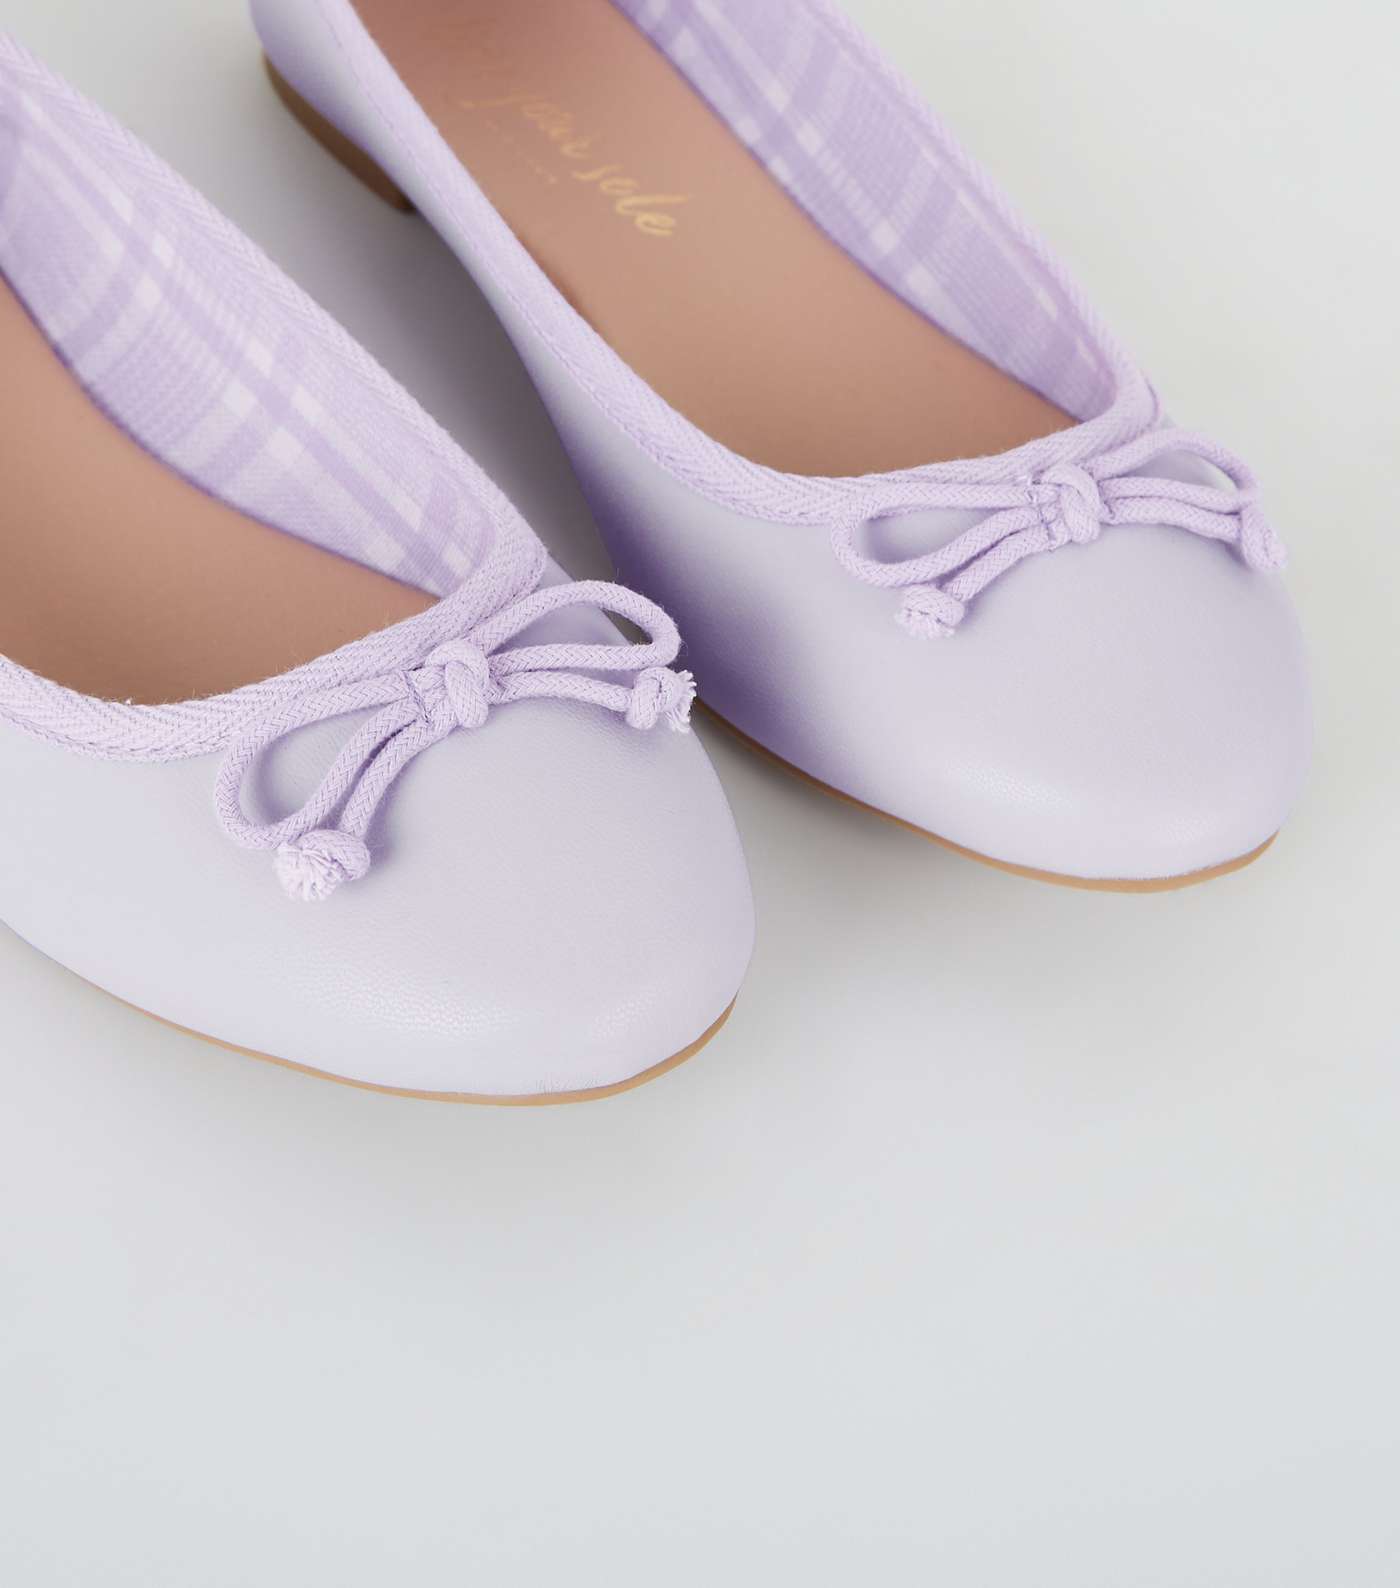 Lilac Leather-Look Check Lined Ballet Pumps Image 4